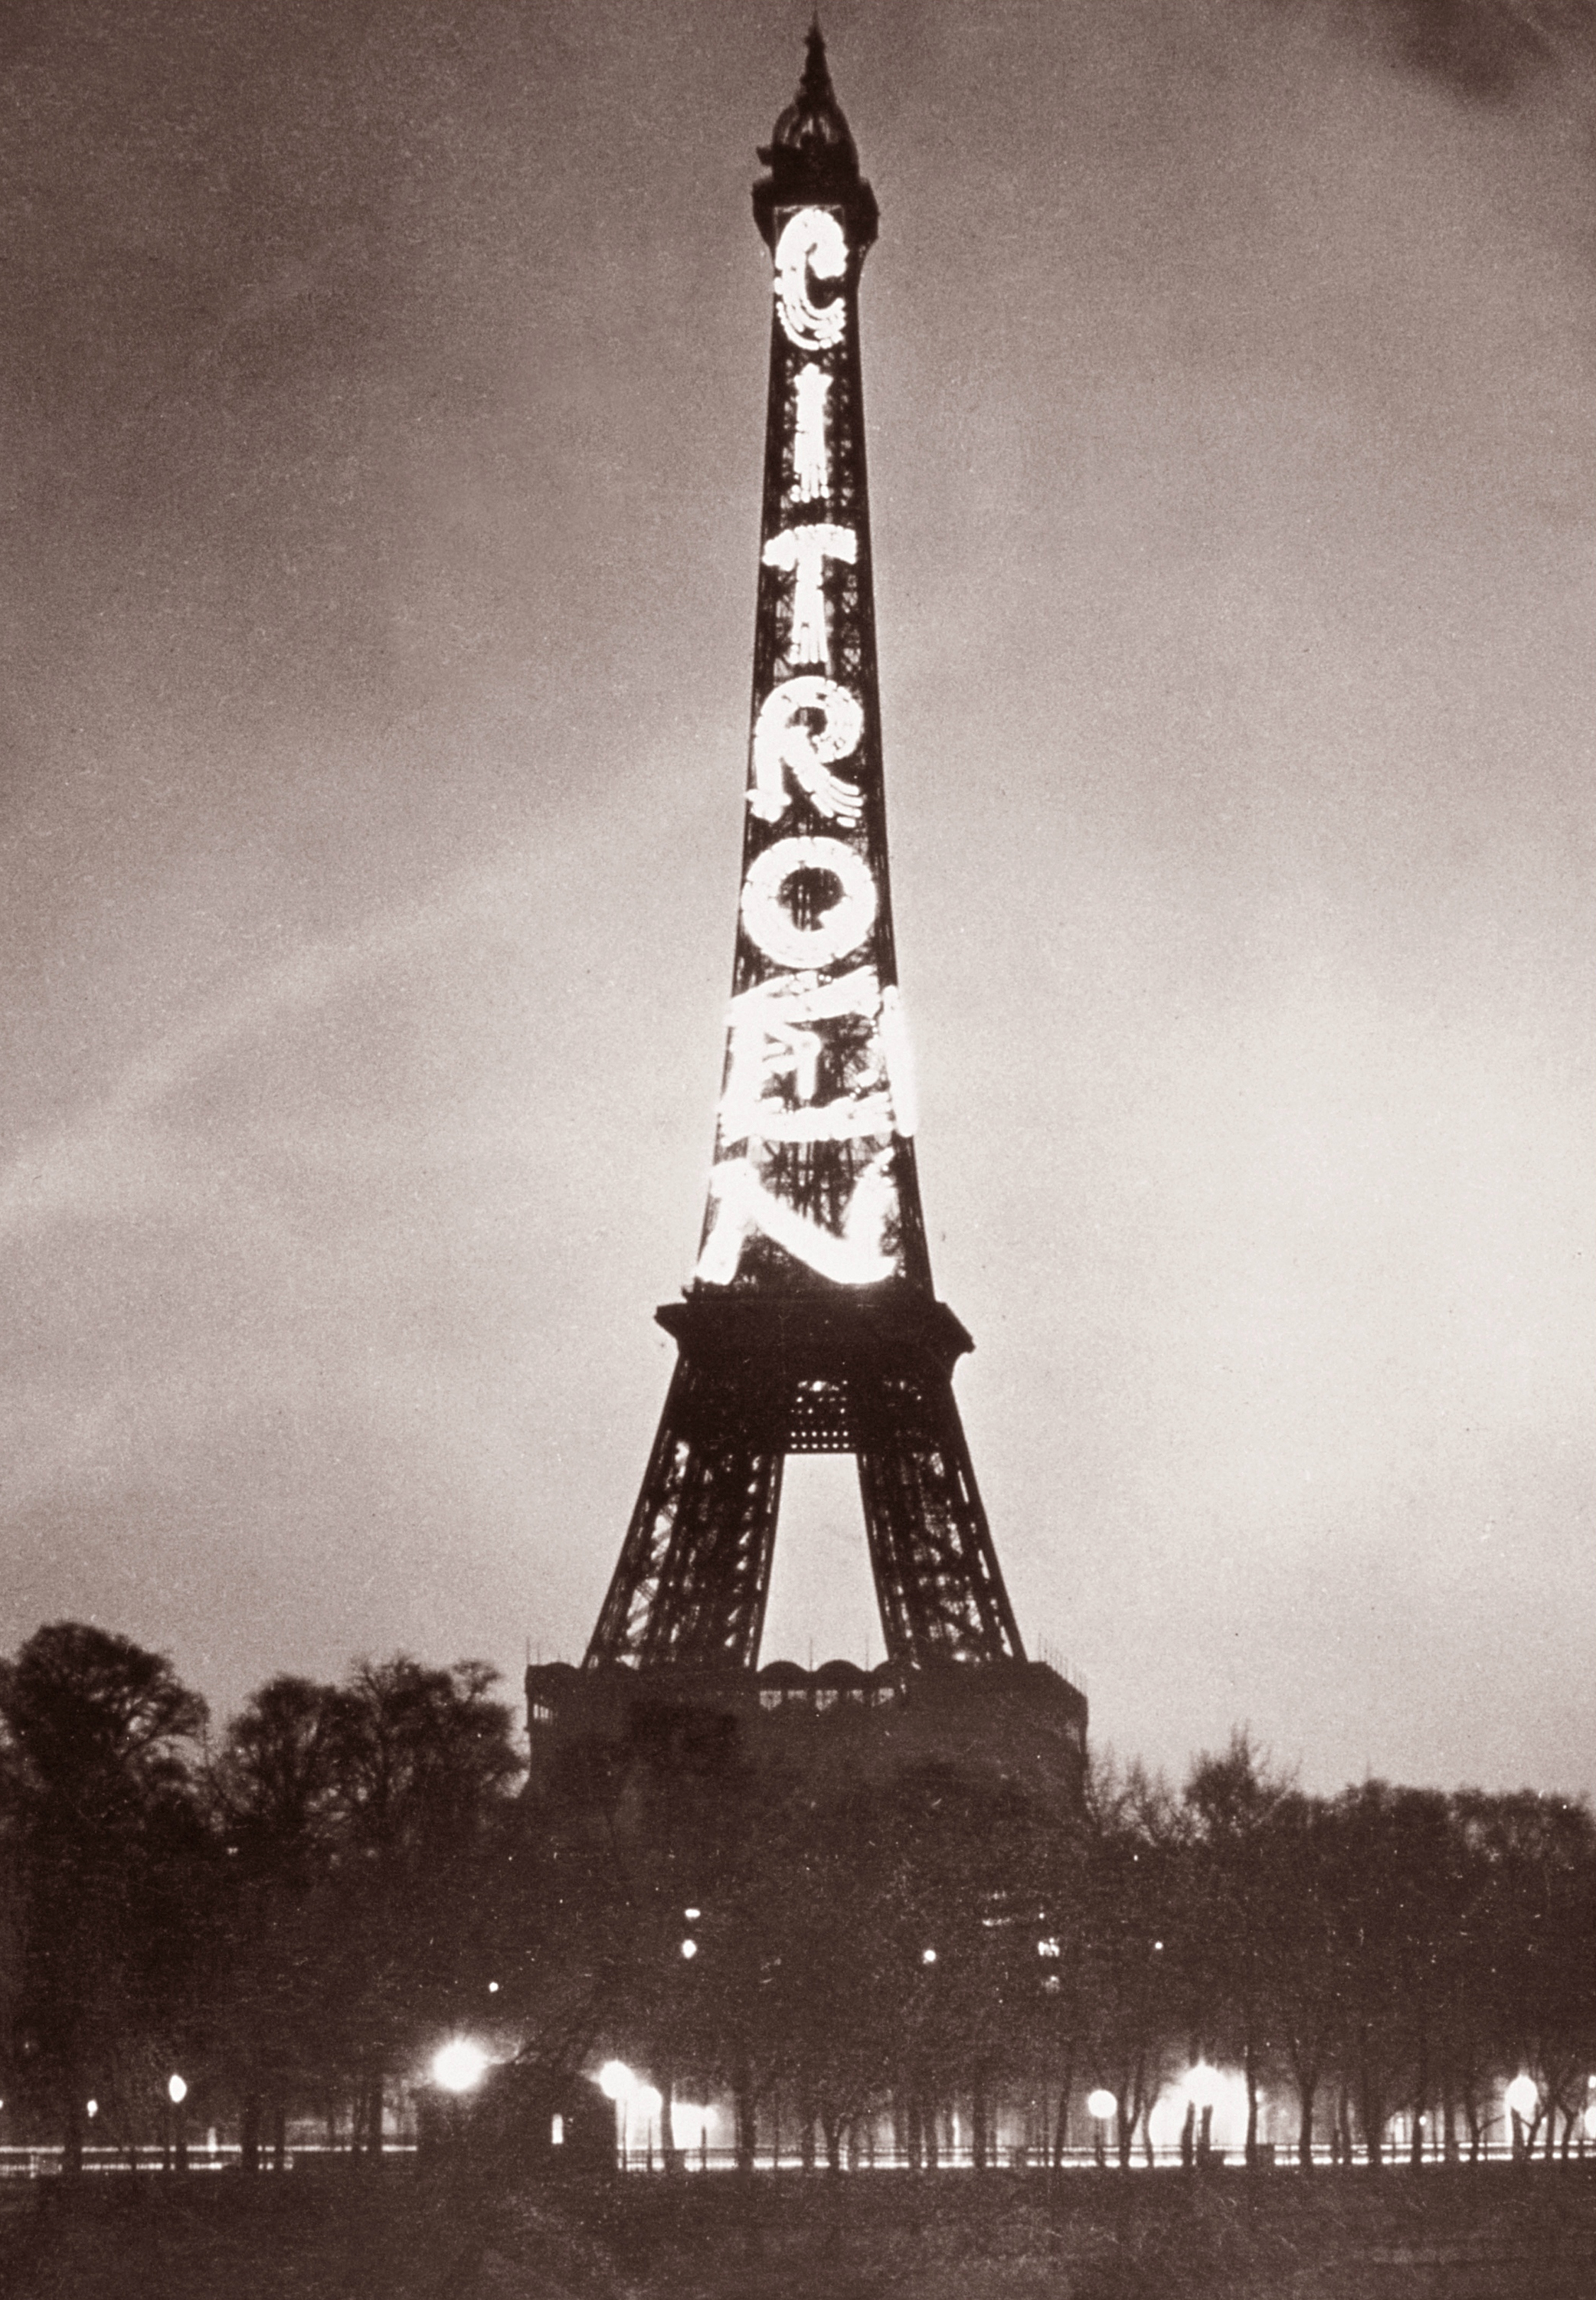 Ten brilliant Citroën car adverts from its first 100 years Citroen Eiffel Tower light display